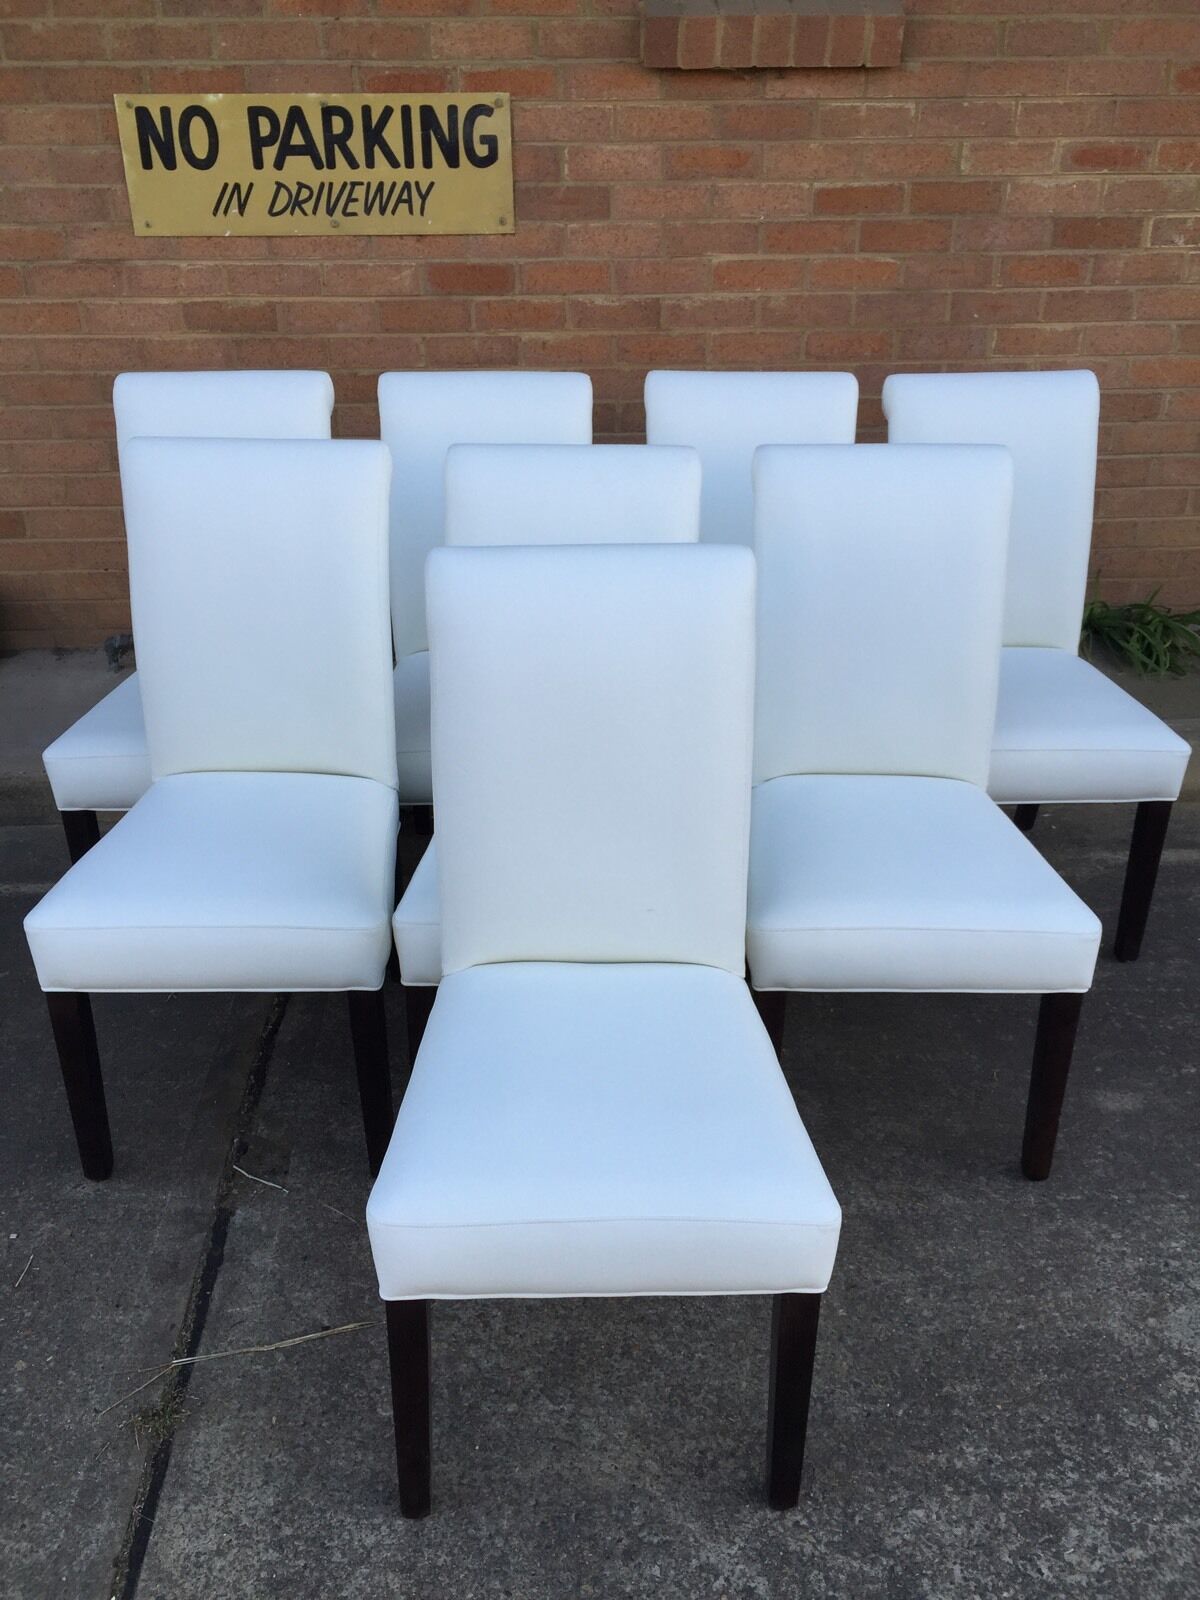 Genuine Leather Dining Chairs, White Real Leather Dining Chairs